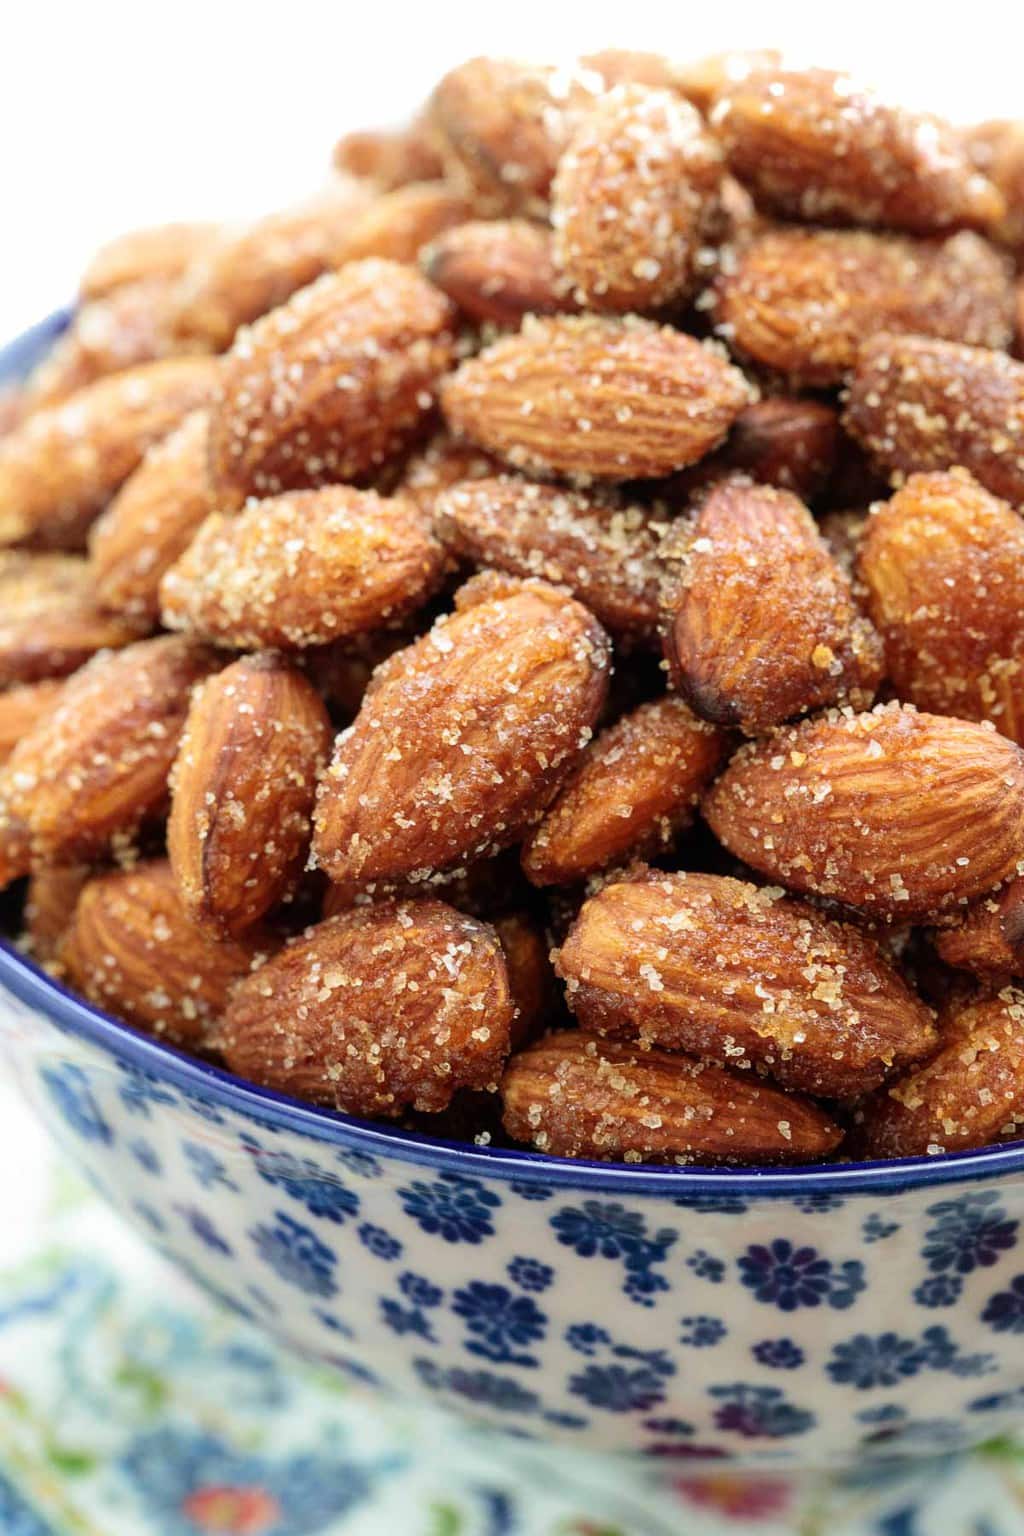 Extreme closeup of a bowl of Sweet and Spicy Roasted Almonds.